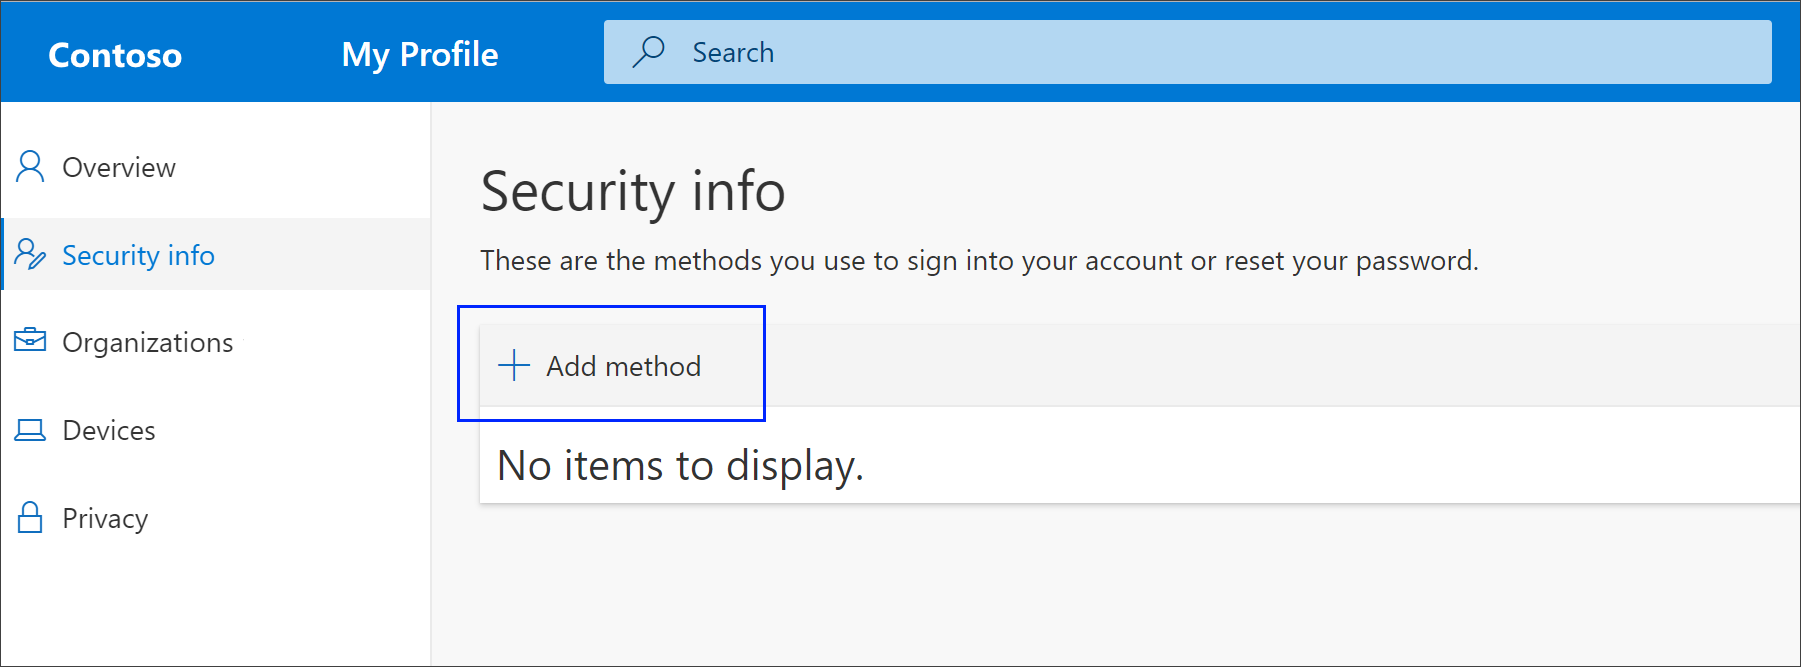 Security info page with highlighted Add method option